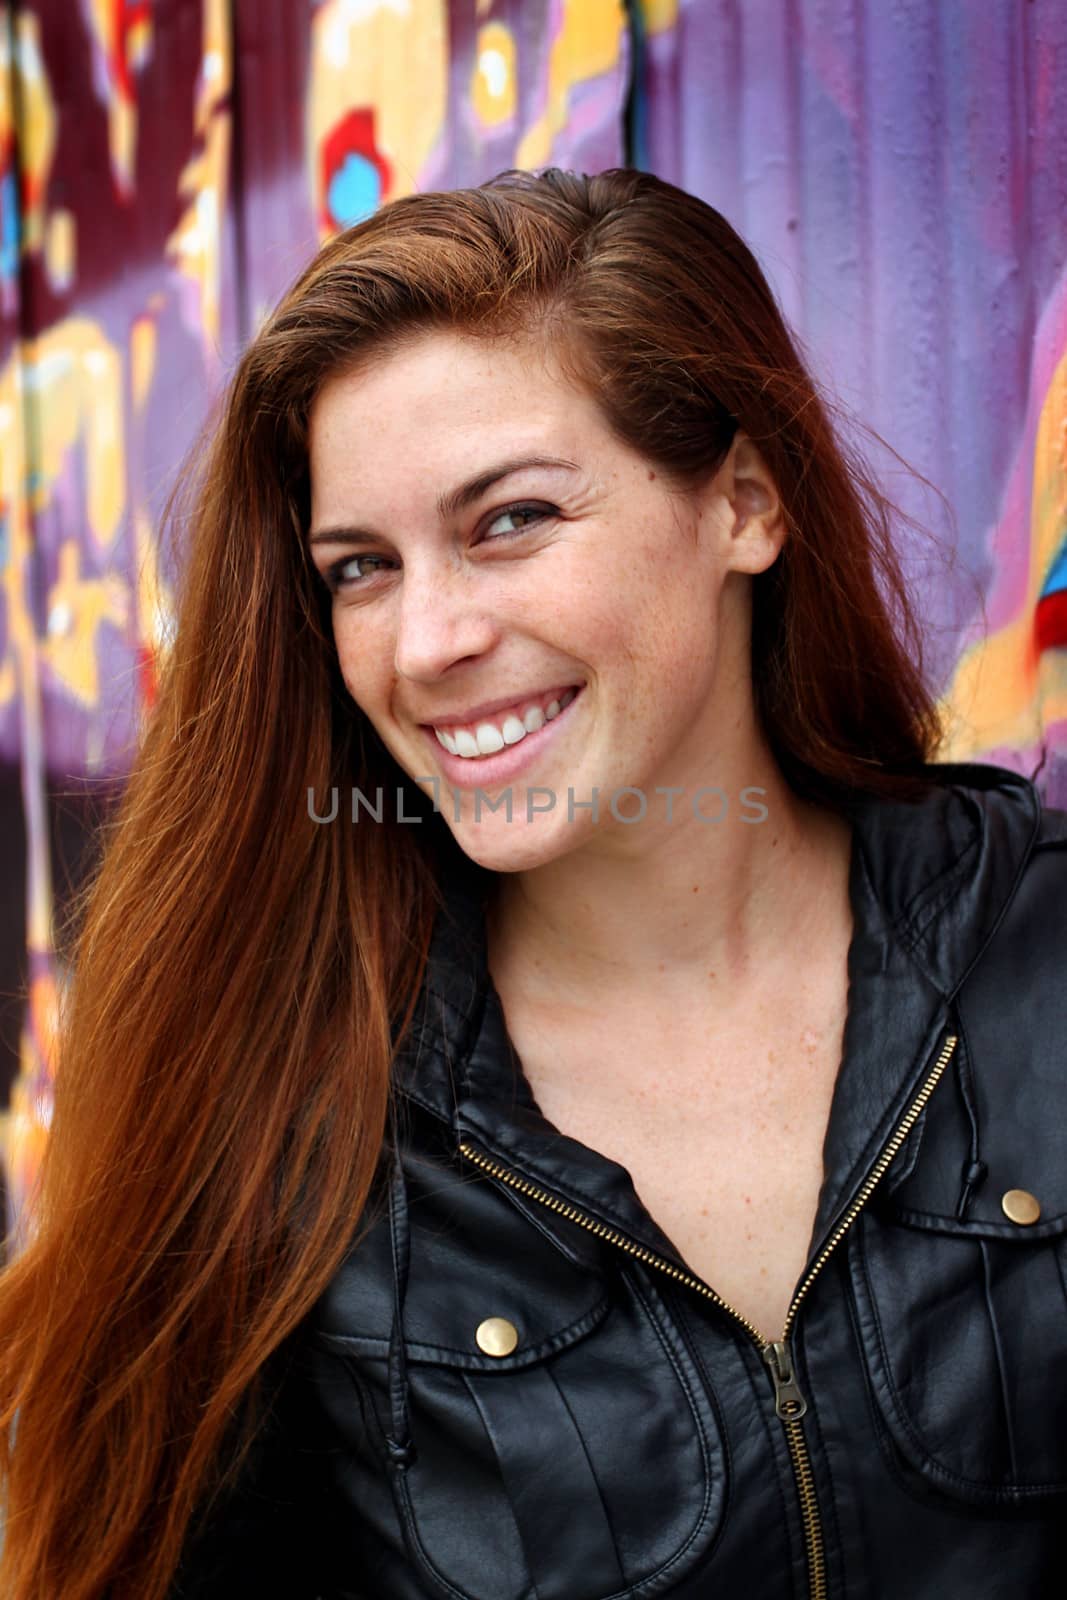 Portrait of a young woman infront of a colorful wall.